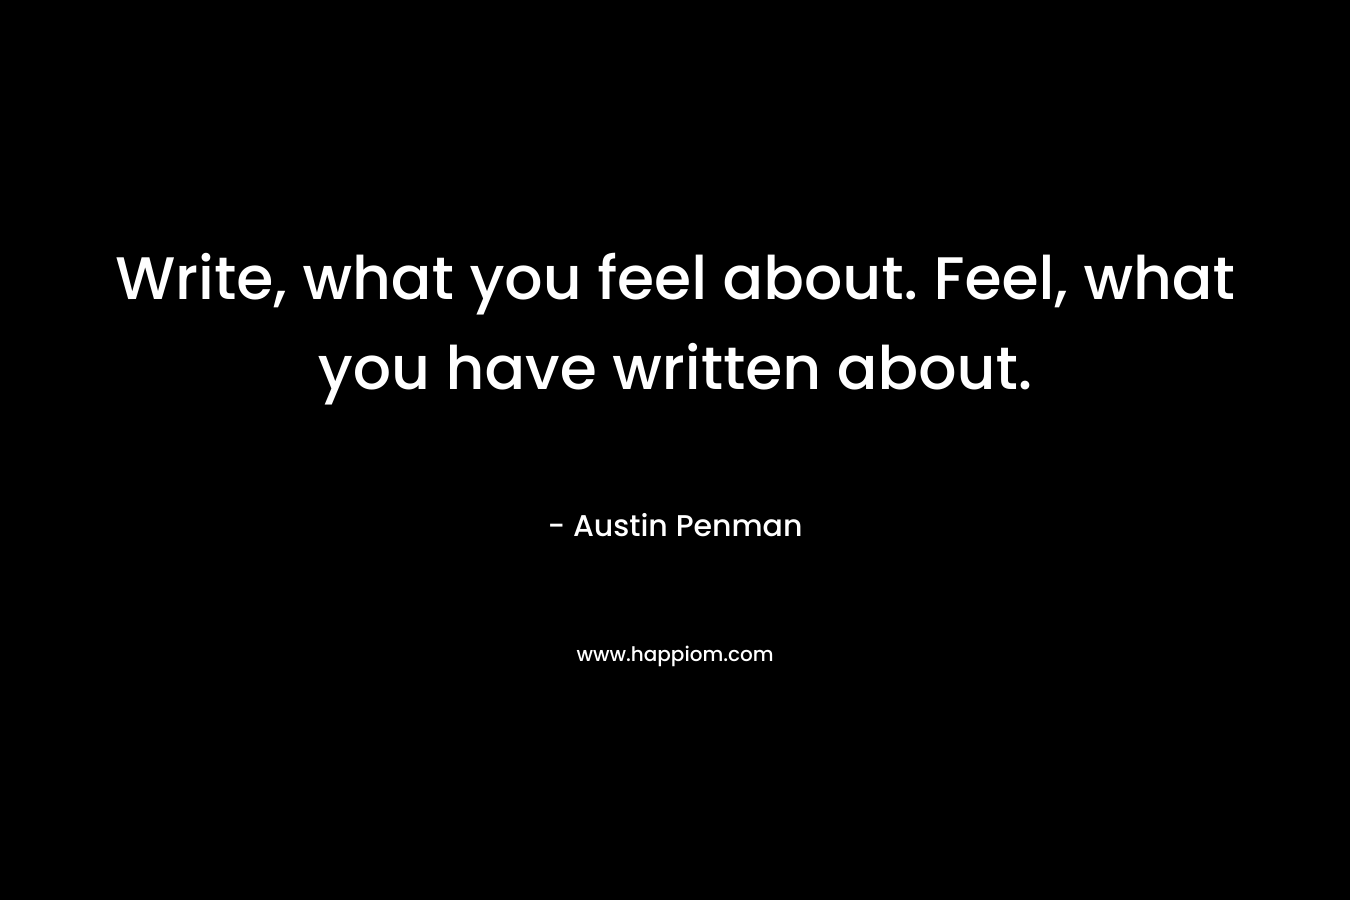 Write, what you feel about. Feel, what you have written about.